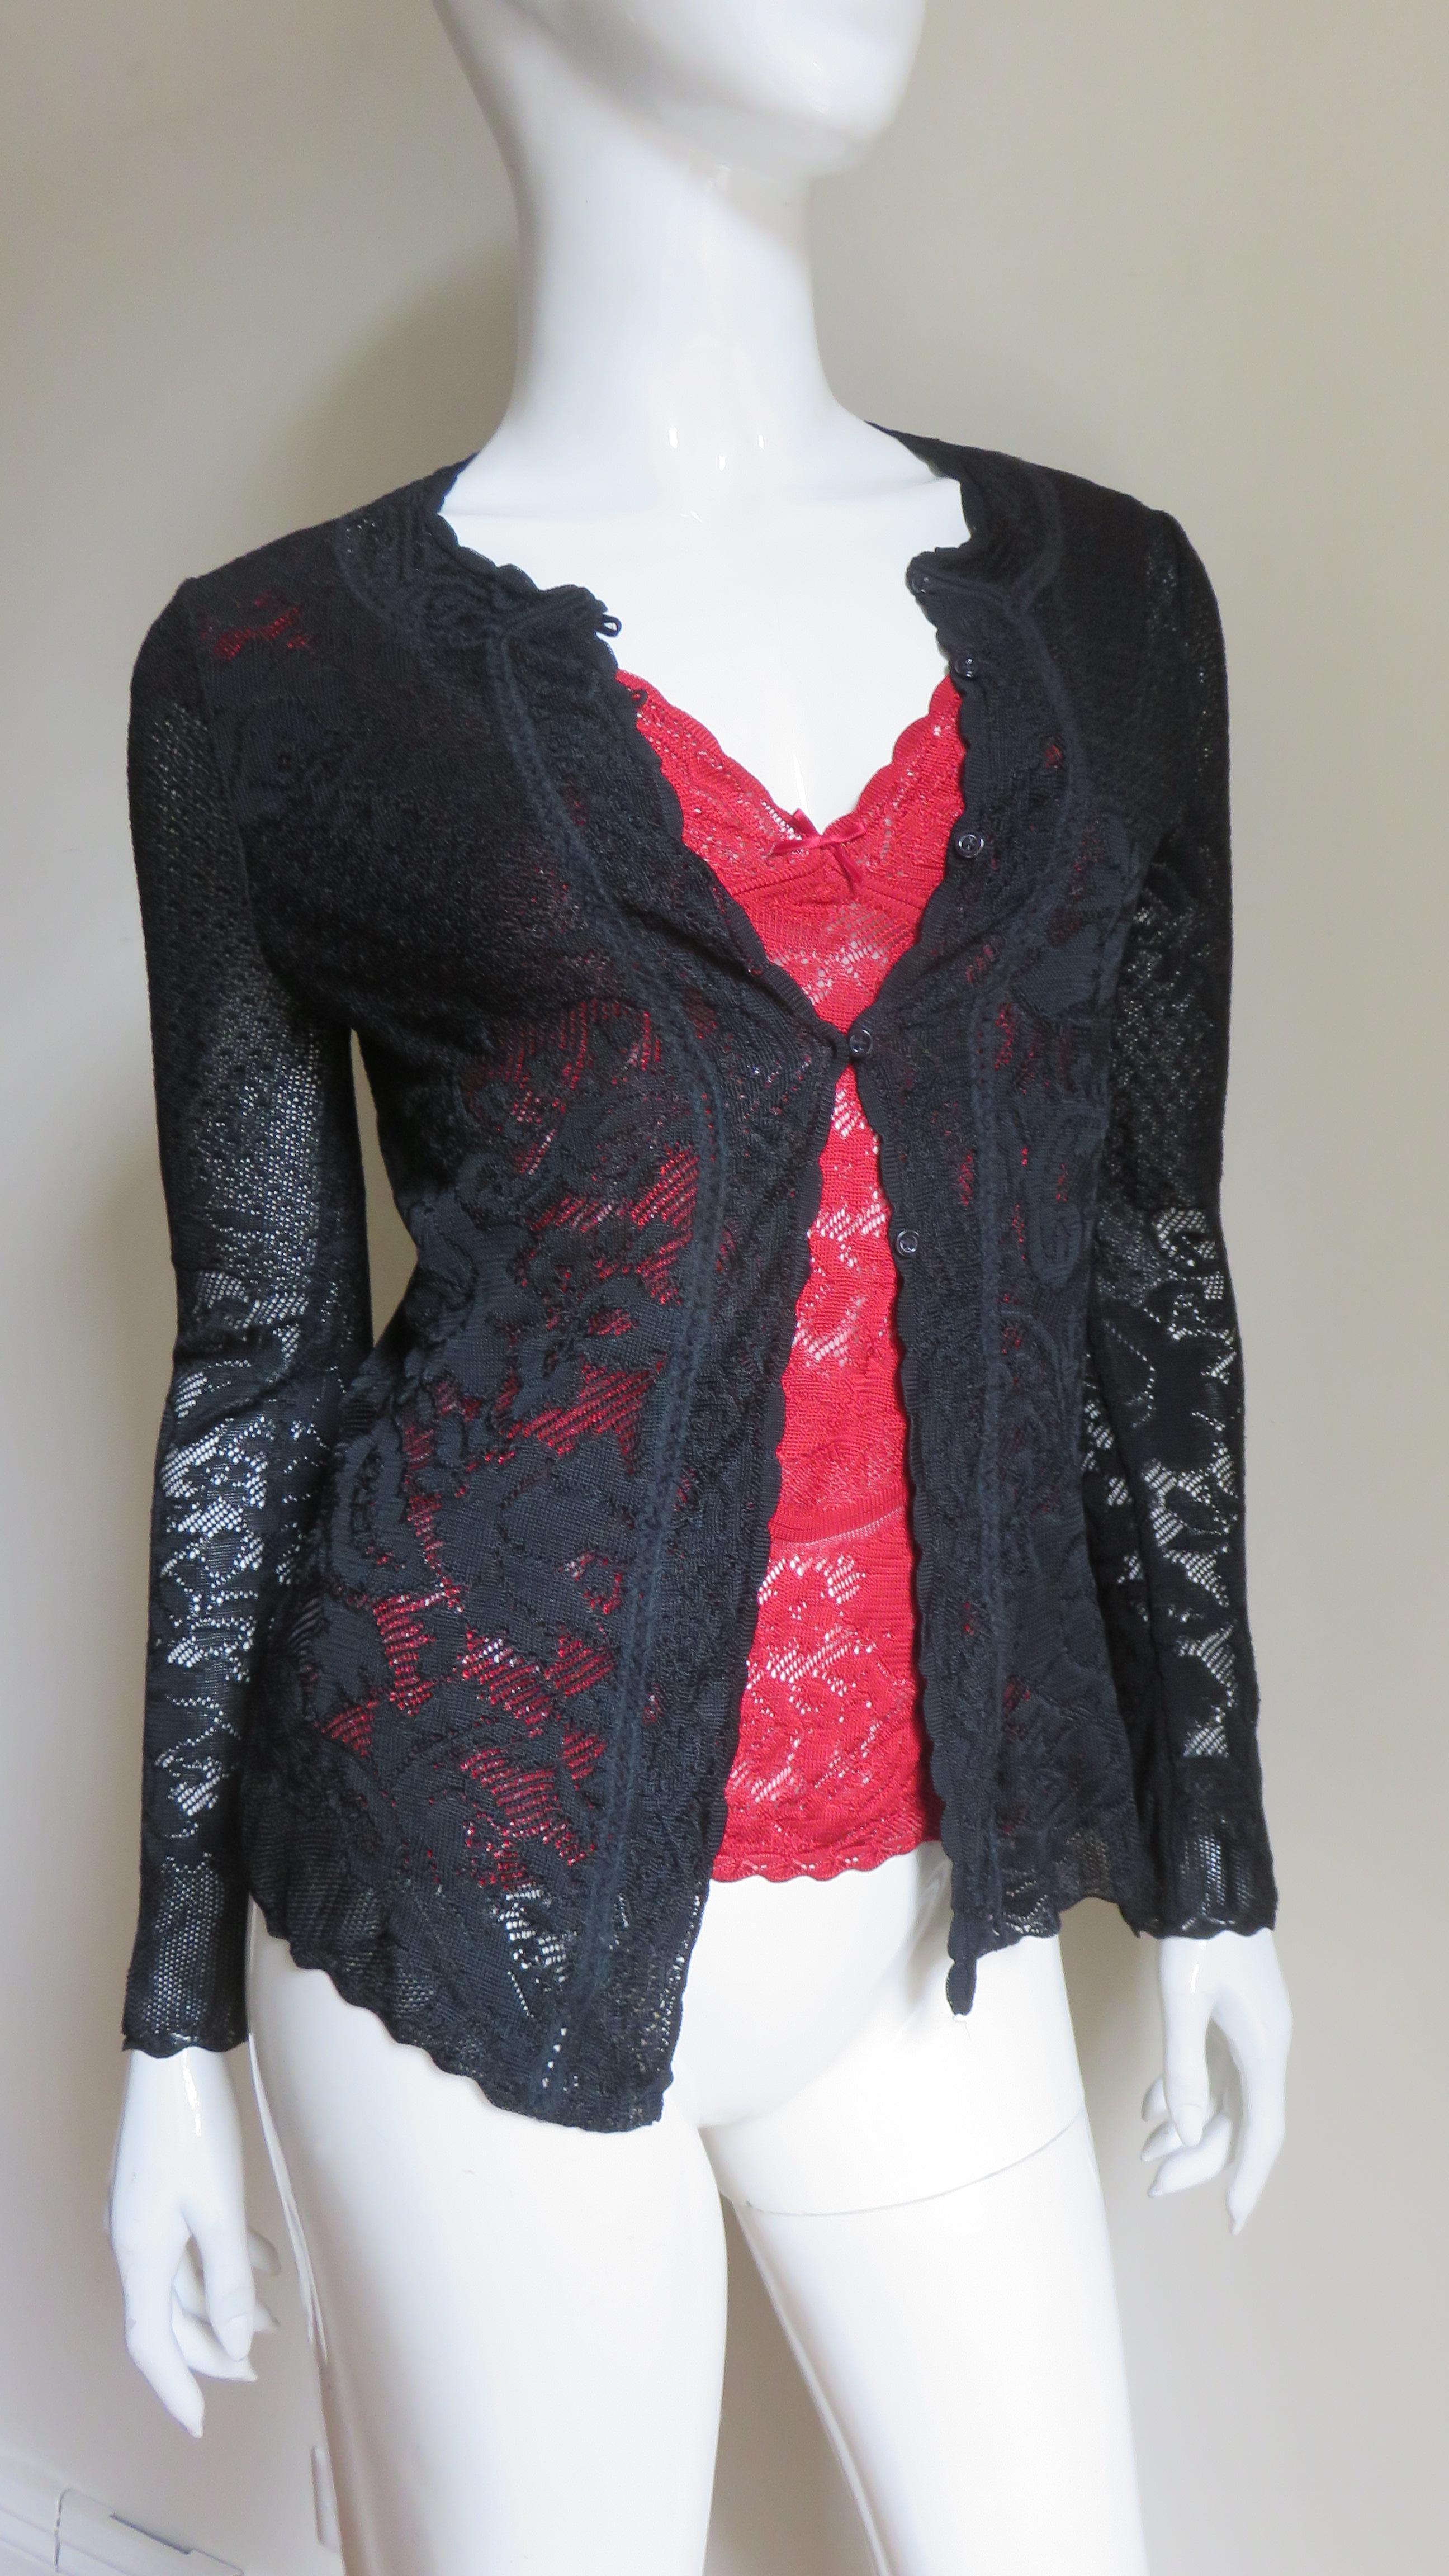 A fabulous cardigan and camisole set in black knit lace plus an additional matching red camisole all from John Galliano. The set consists of 2 flower pattern lace knit camisoles one black and one red with a V neckline and shoulder straps.  The long